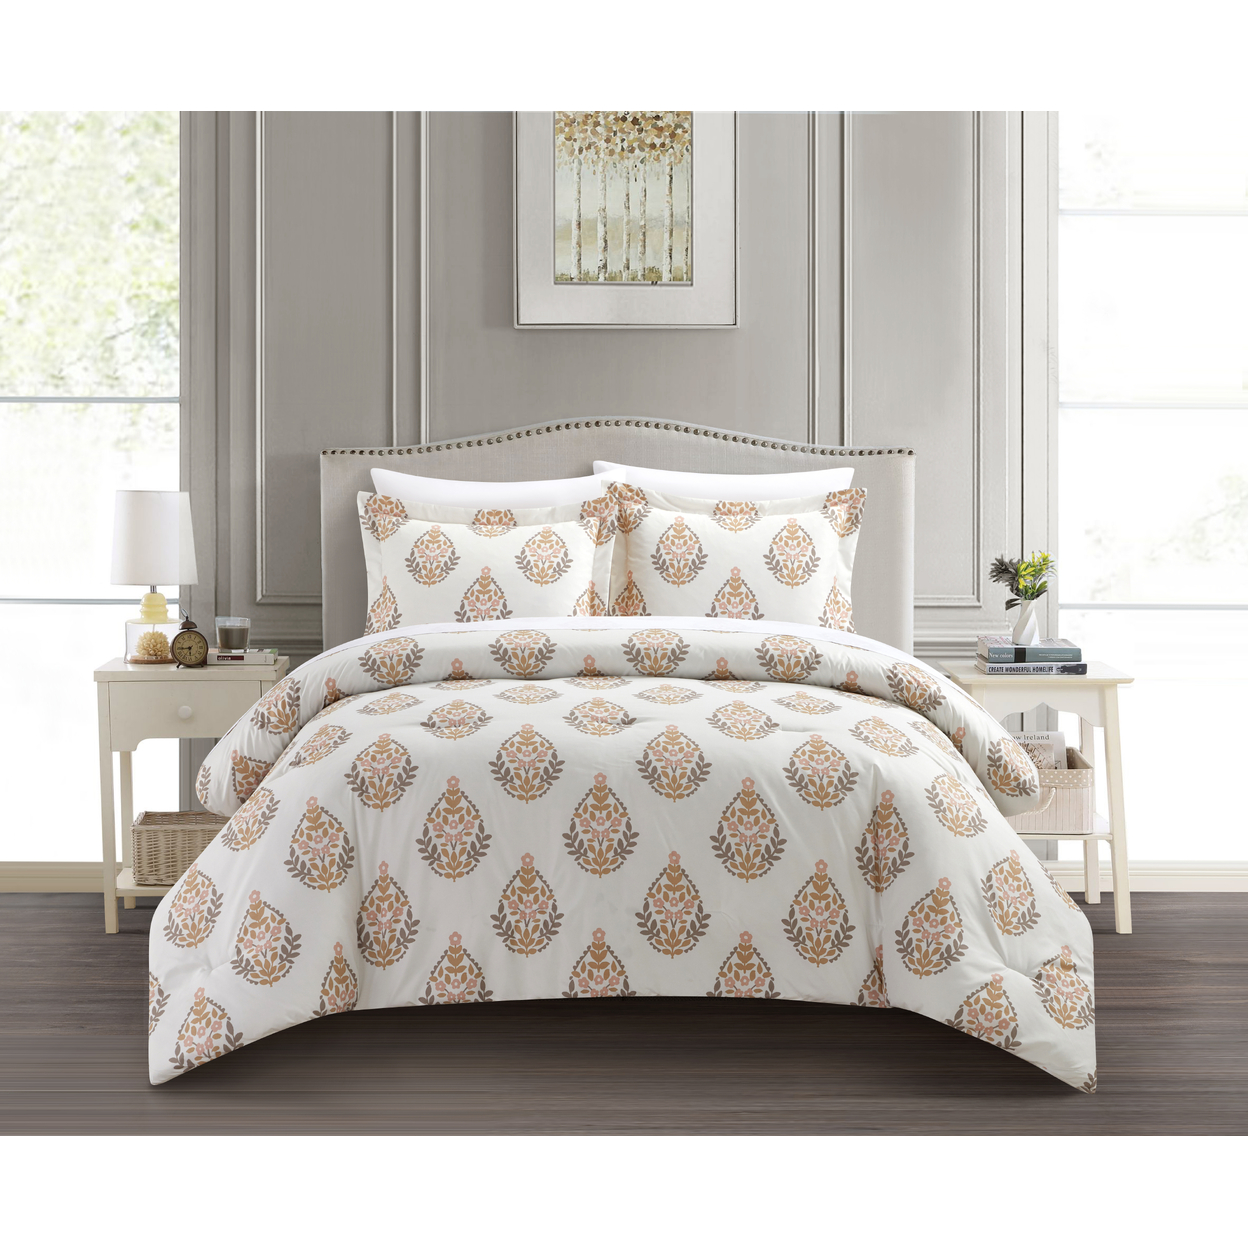 3 Or 2 Piece Duvet Cover Set Print Design With Zipper Closure - Adelia Taupe, King